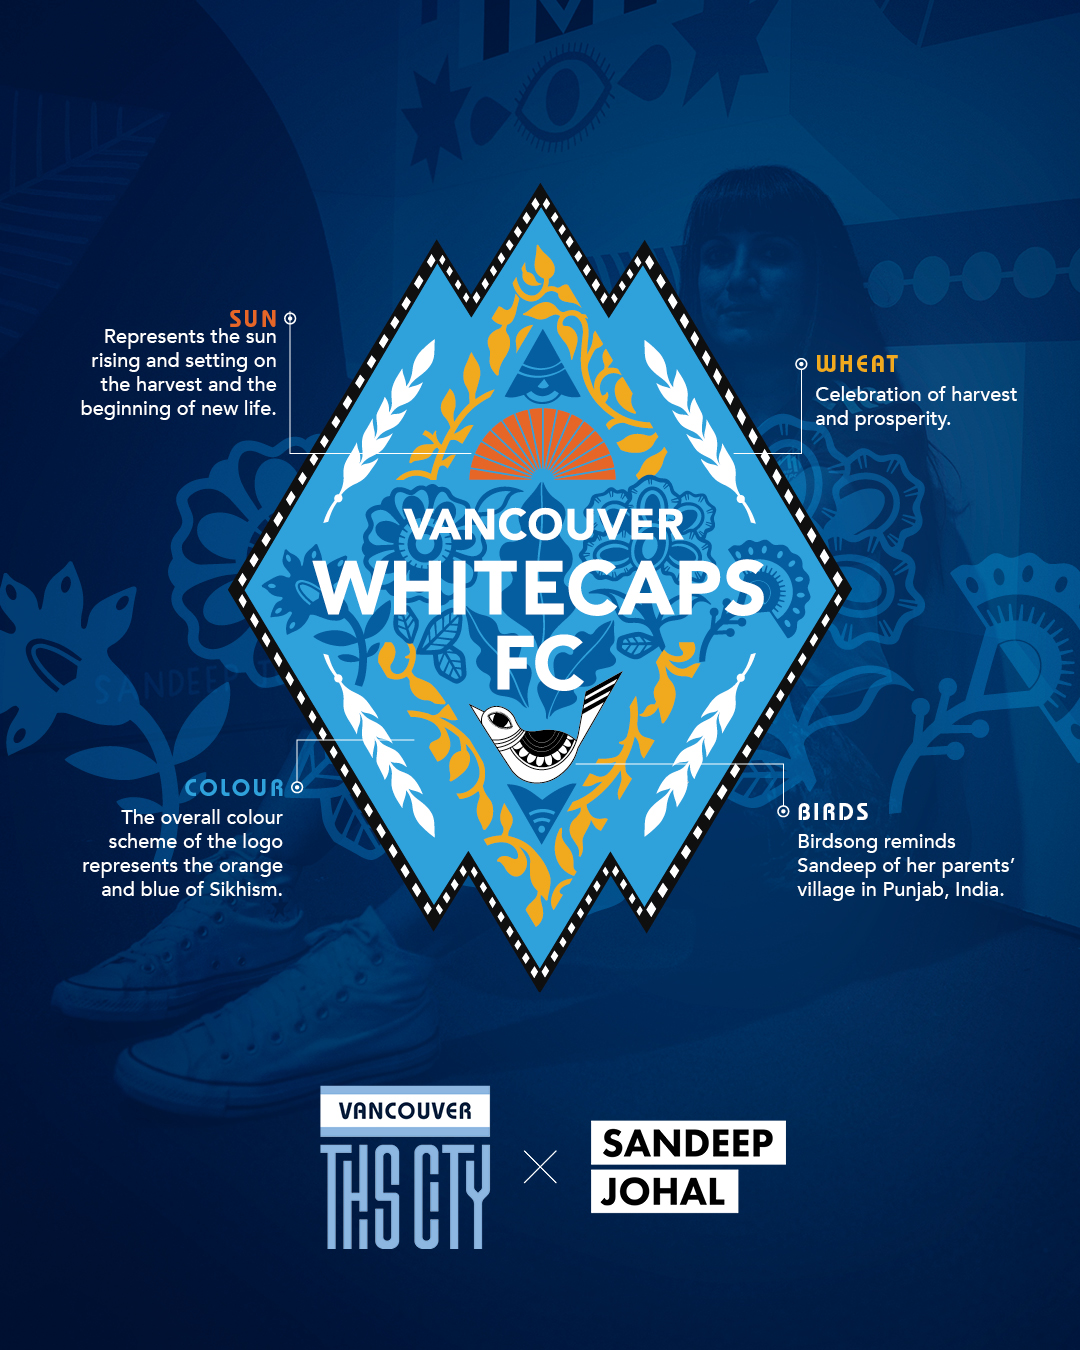 Vancouver Whitecaps FC - Vaisakhi's a chance to show what our heritage is  about. To foster that community and sense of belonging and make new  connections. To celebrate #Vaisakhi and #SikhHeritageMonth, we